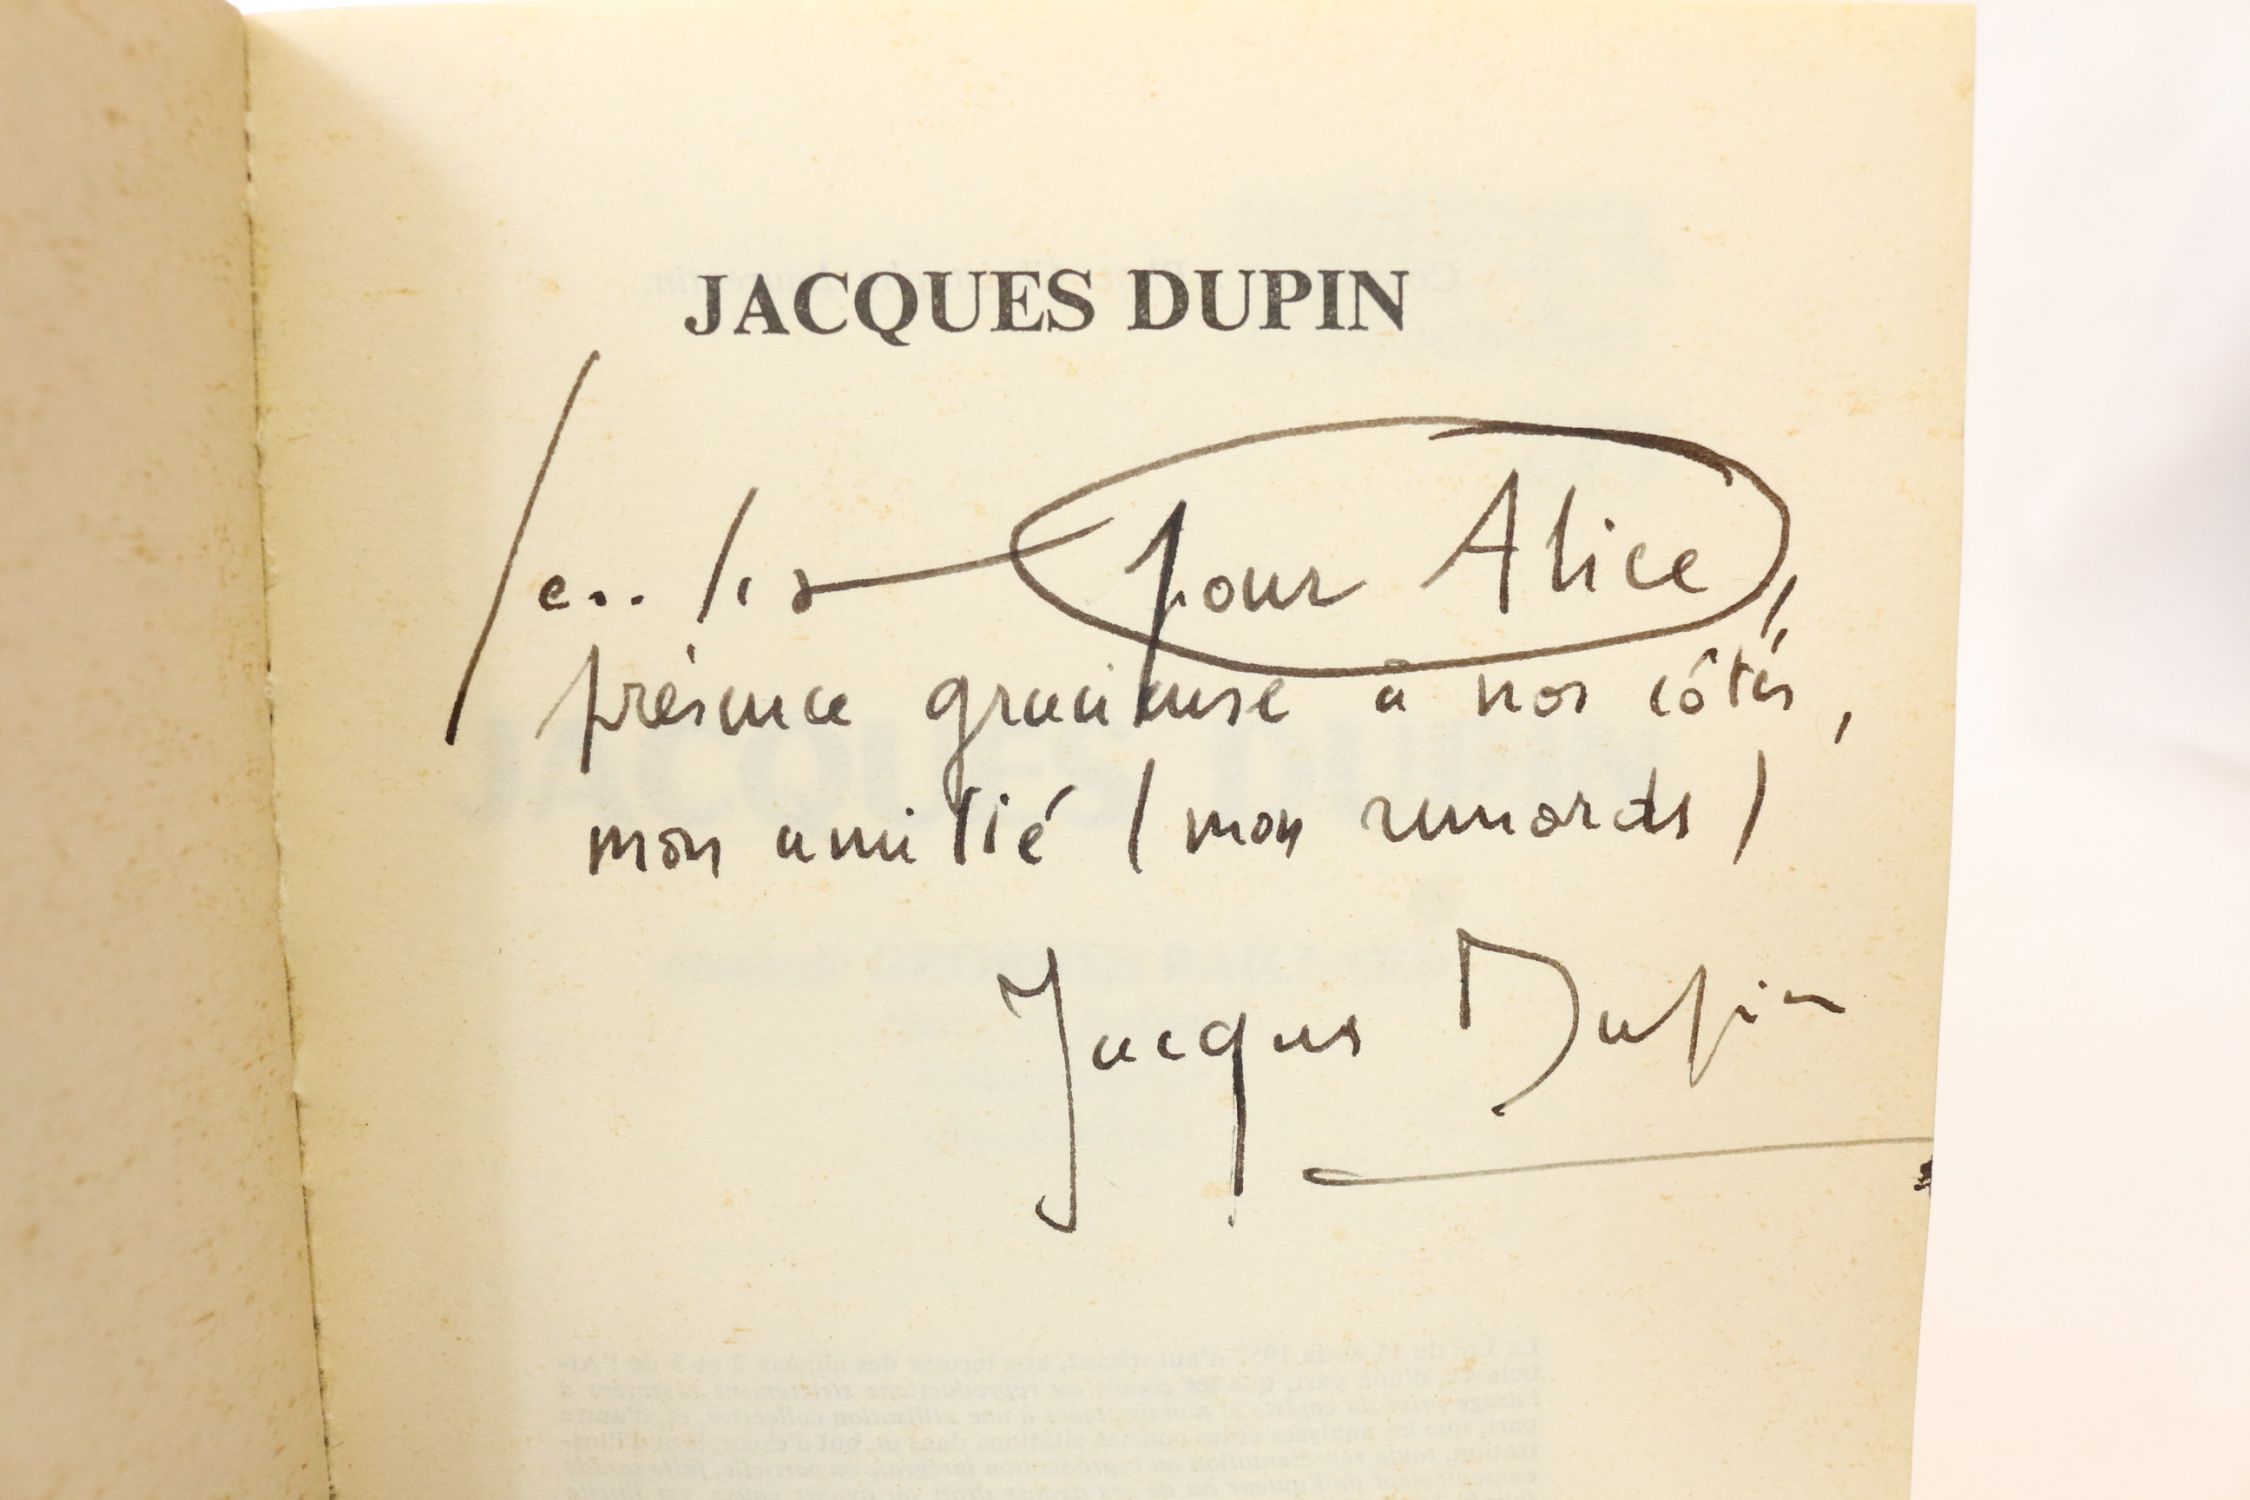 dupin jacques